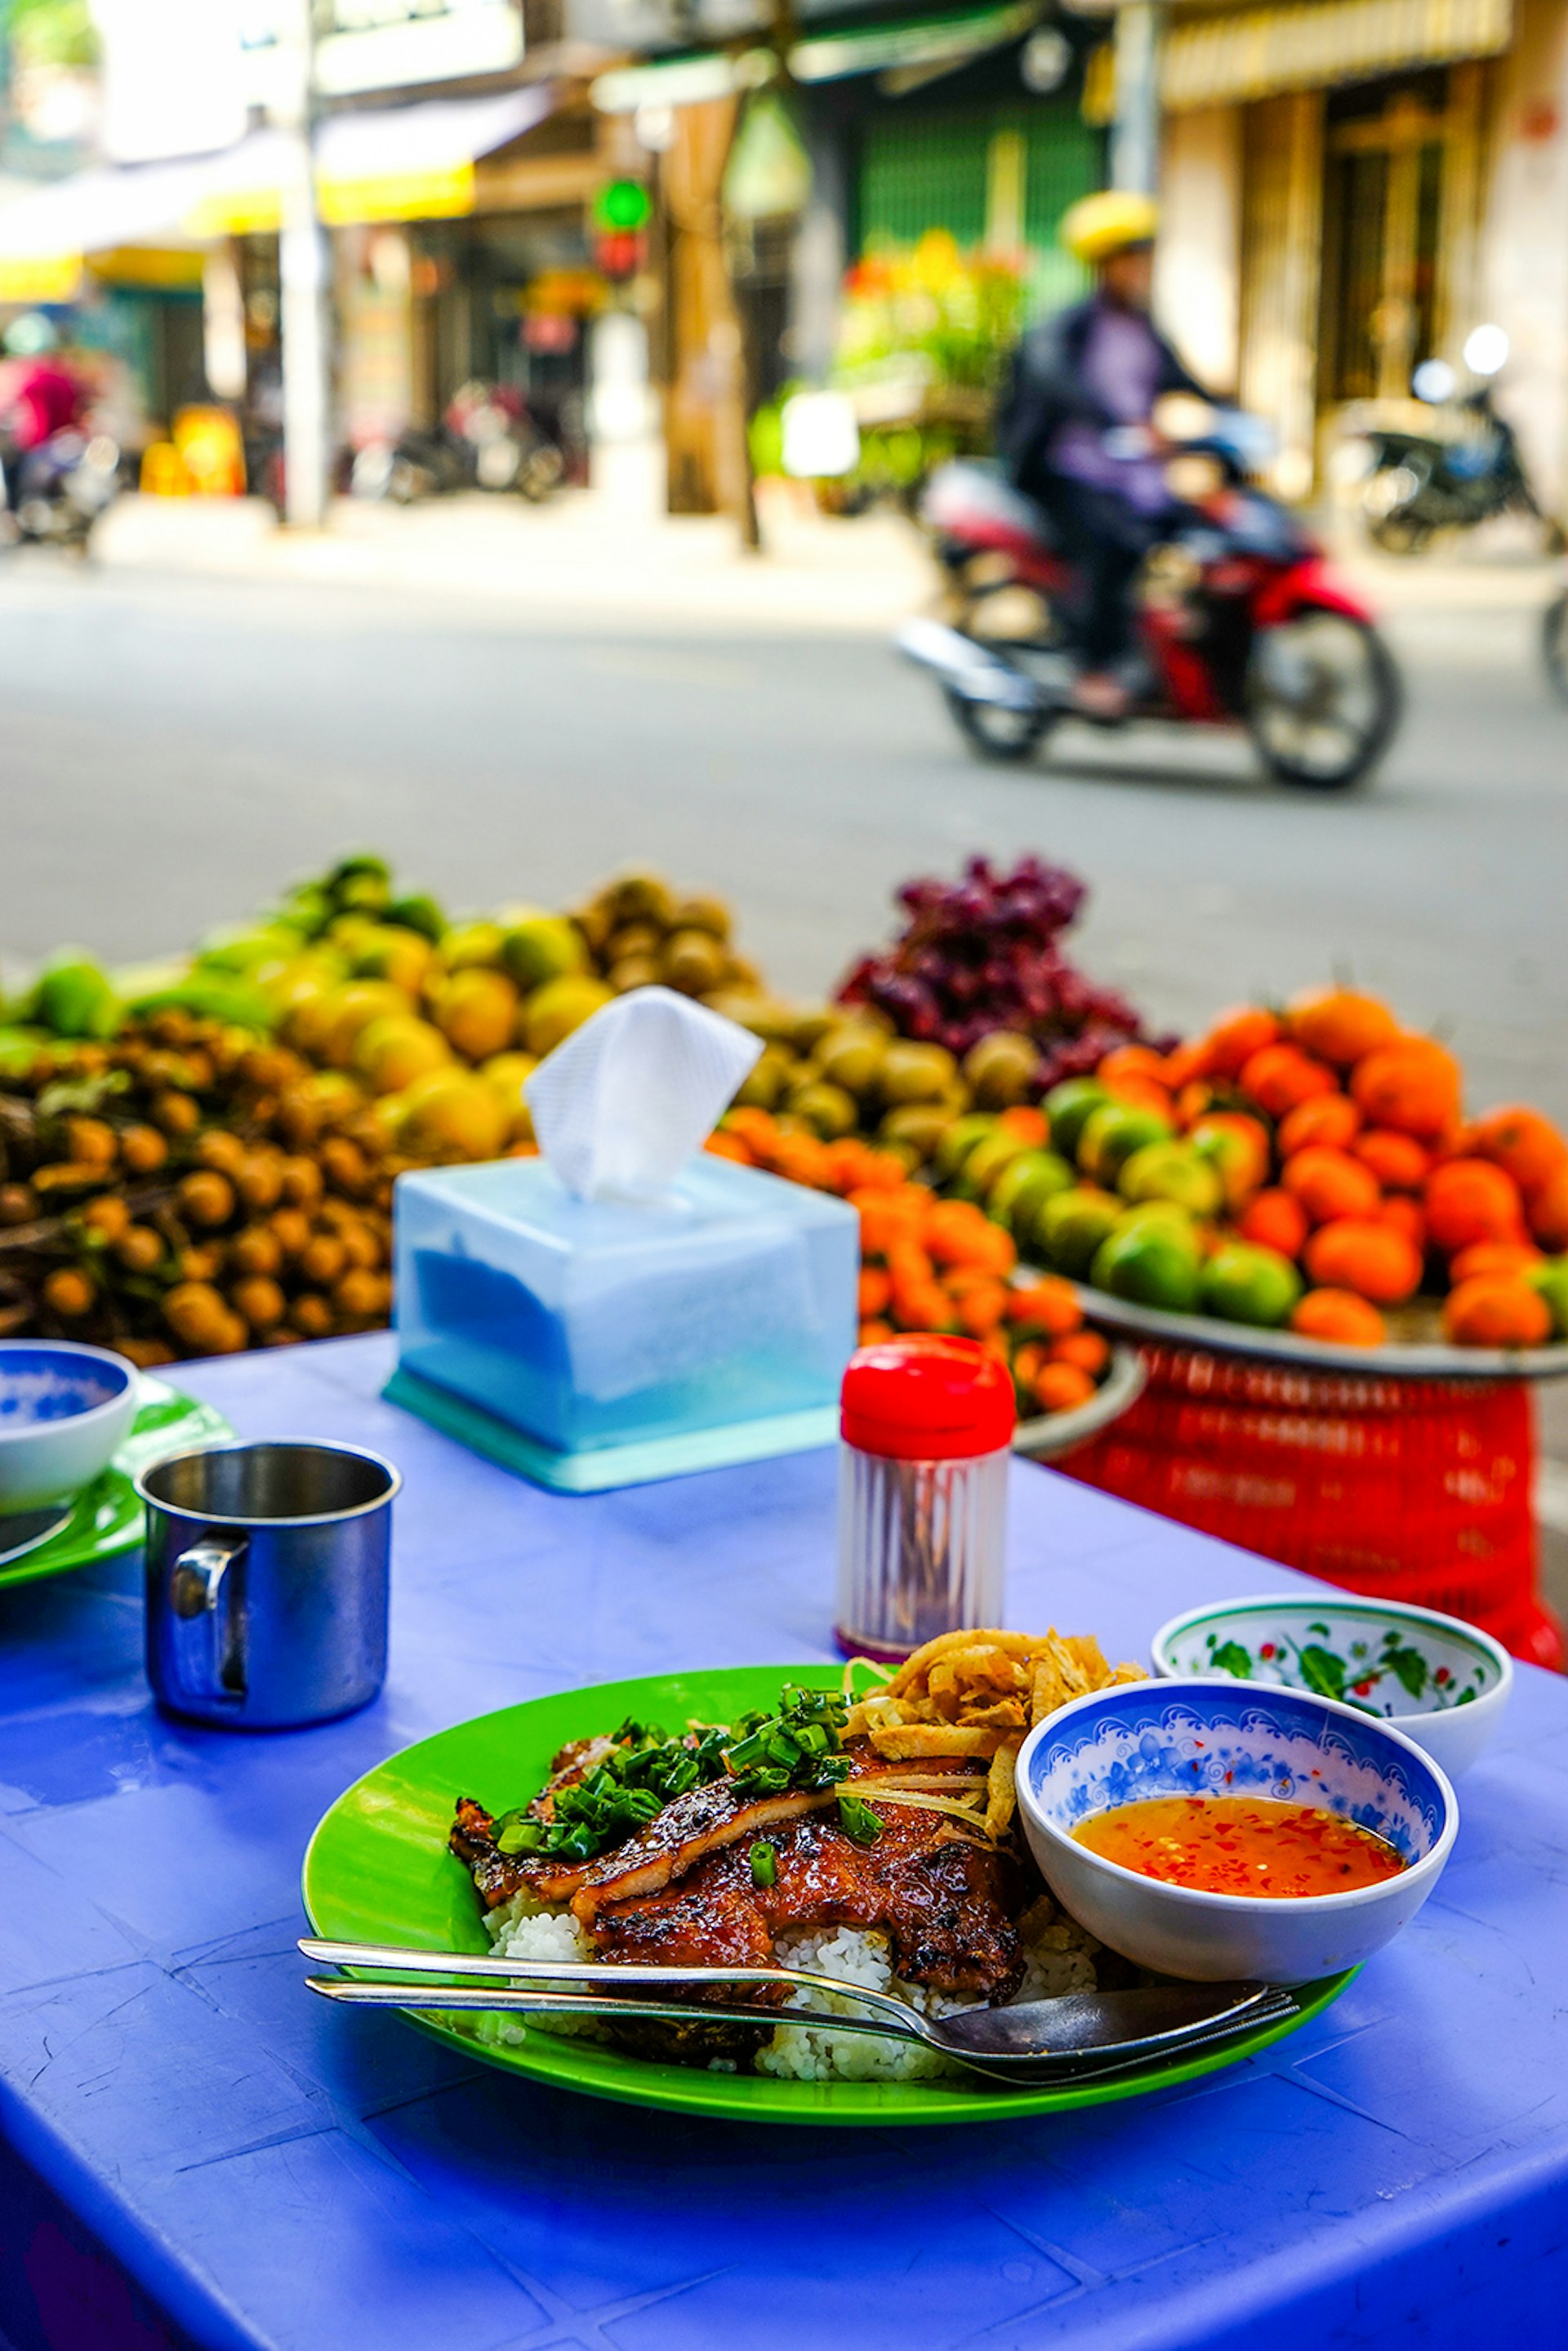 A bowl of food on a blue tablecloth in the foreground with fruit and a man on a motorbike in the background © James Pham / Lonely Planet